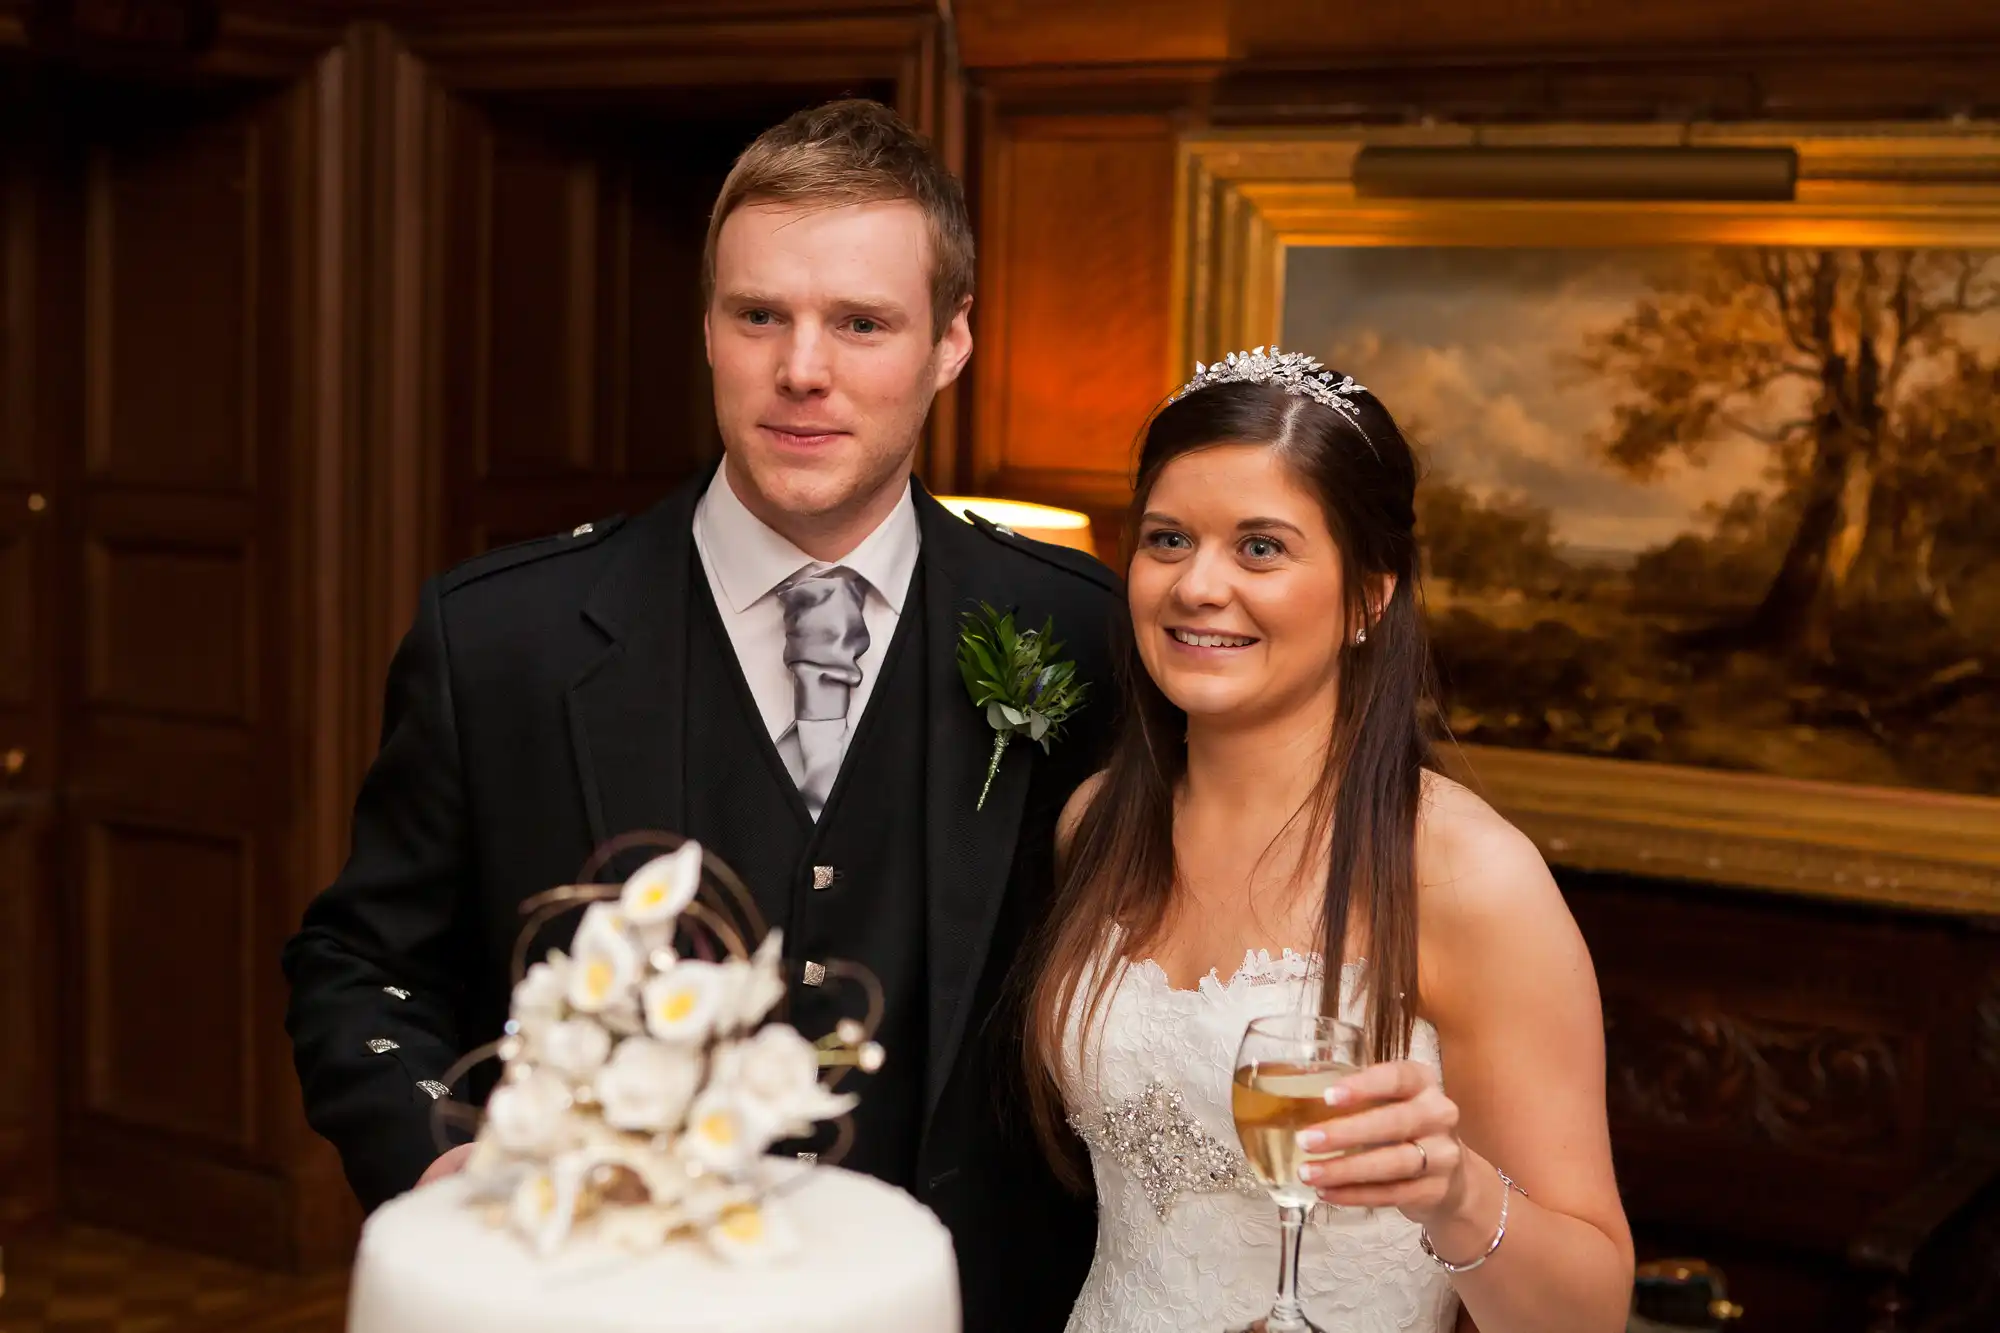 A bride and groom standing beside their wedding cake in an elegant room, smiling gently as they prepare to cut the cake.